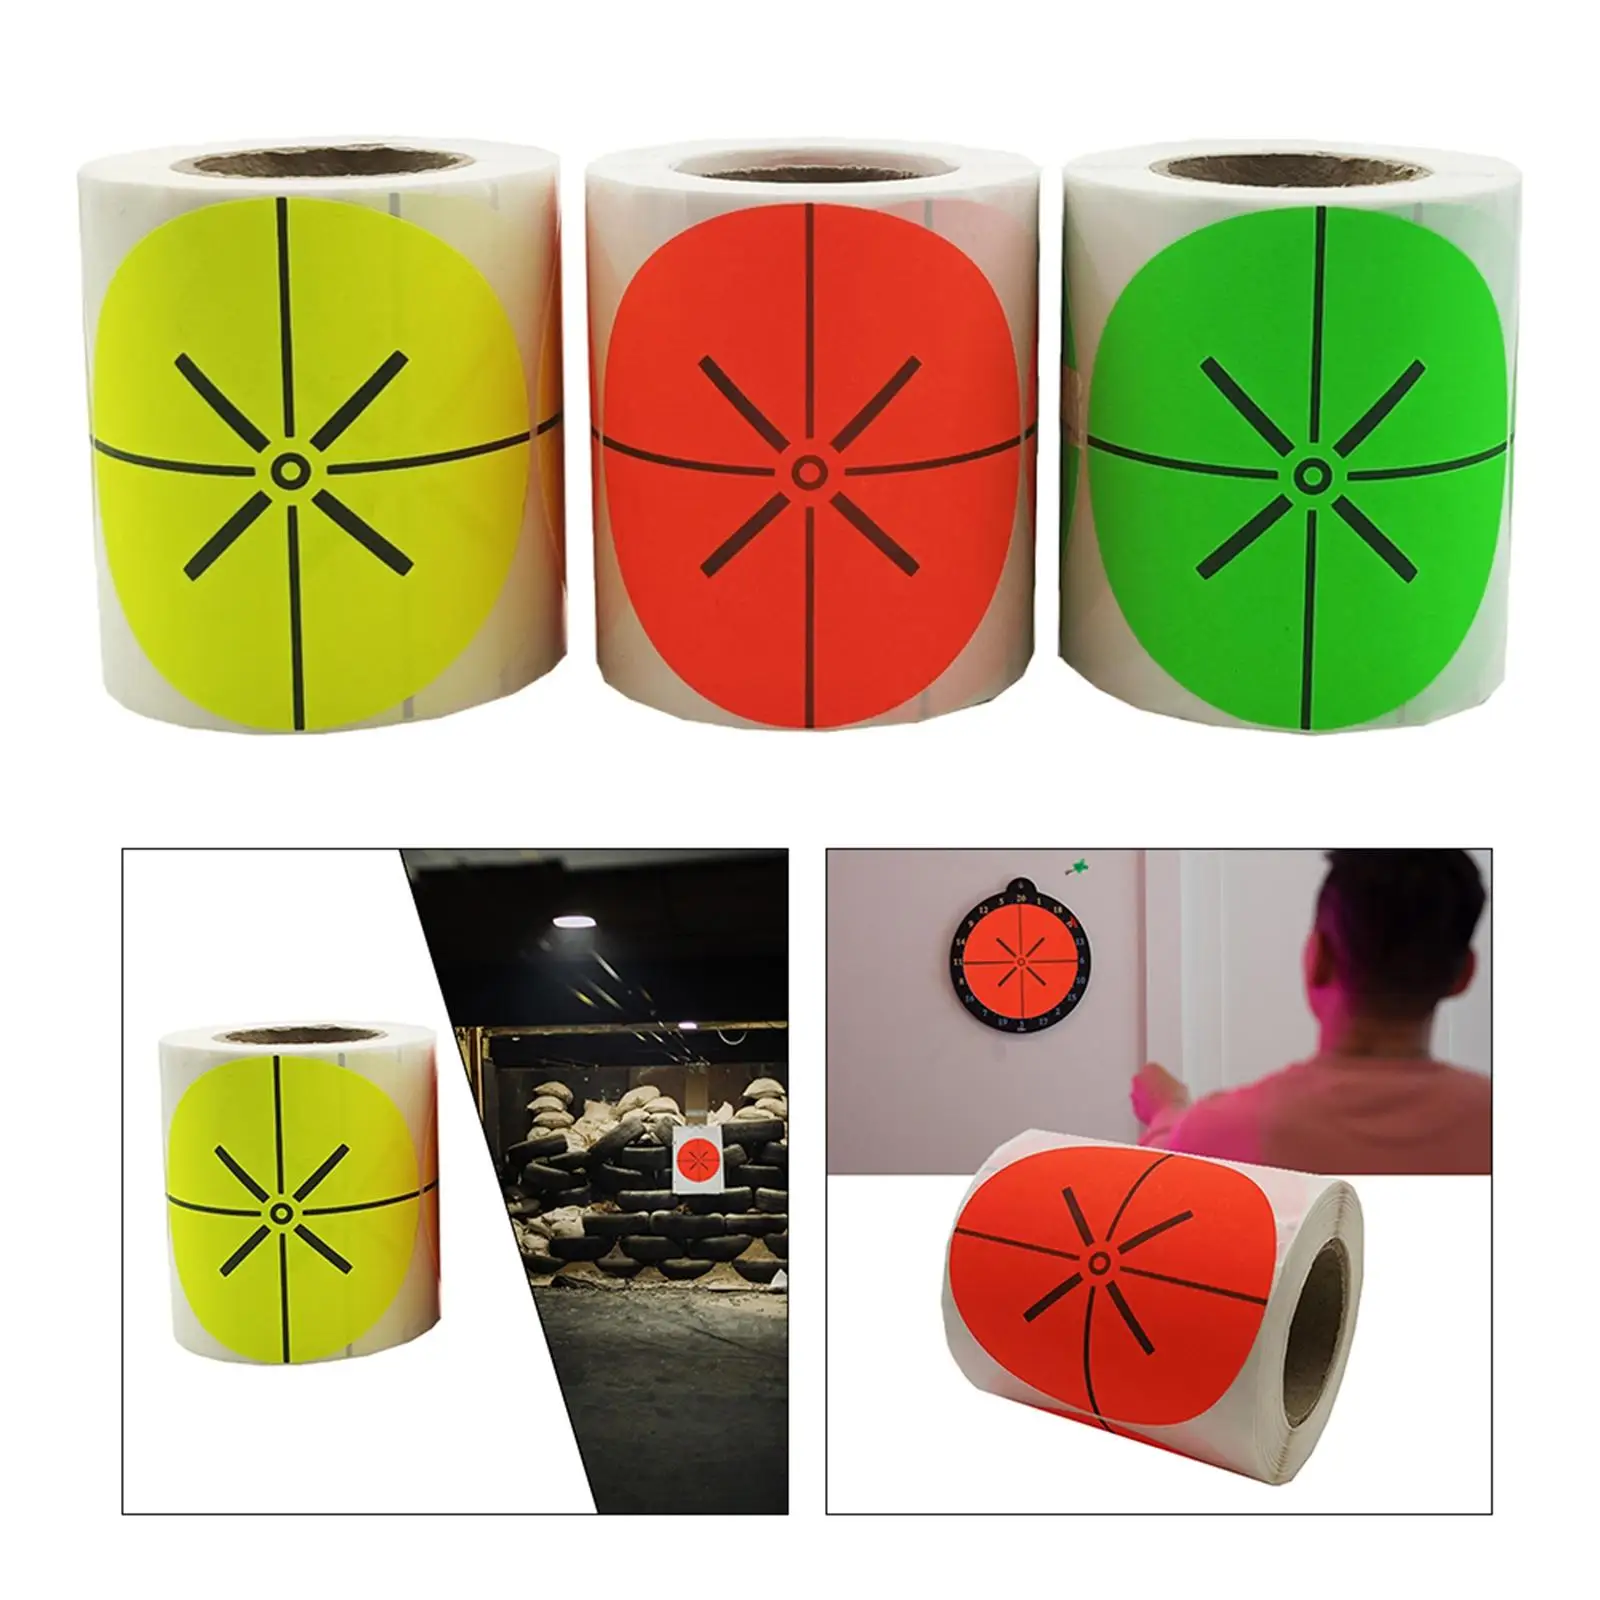 200Pcs Round Shooting Targets, Paper Targets High Visibility Adhesive Target Stickers